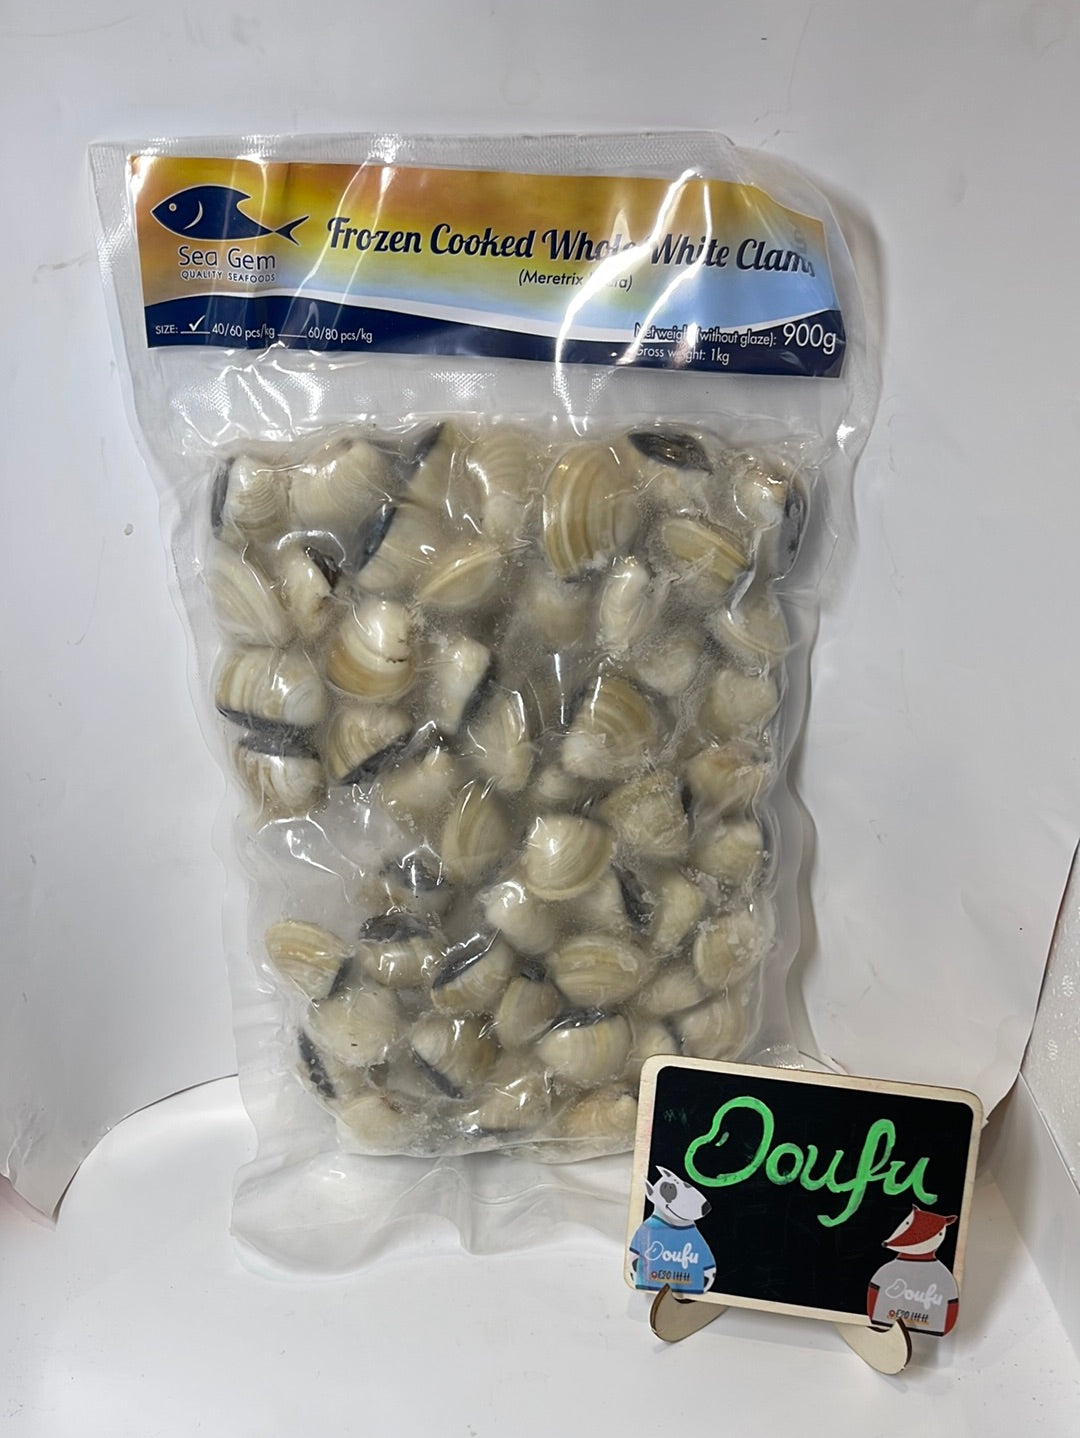 SG Whole White Clams 冷冻白蛤蜊1kg